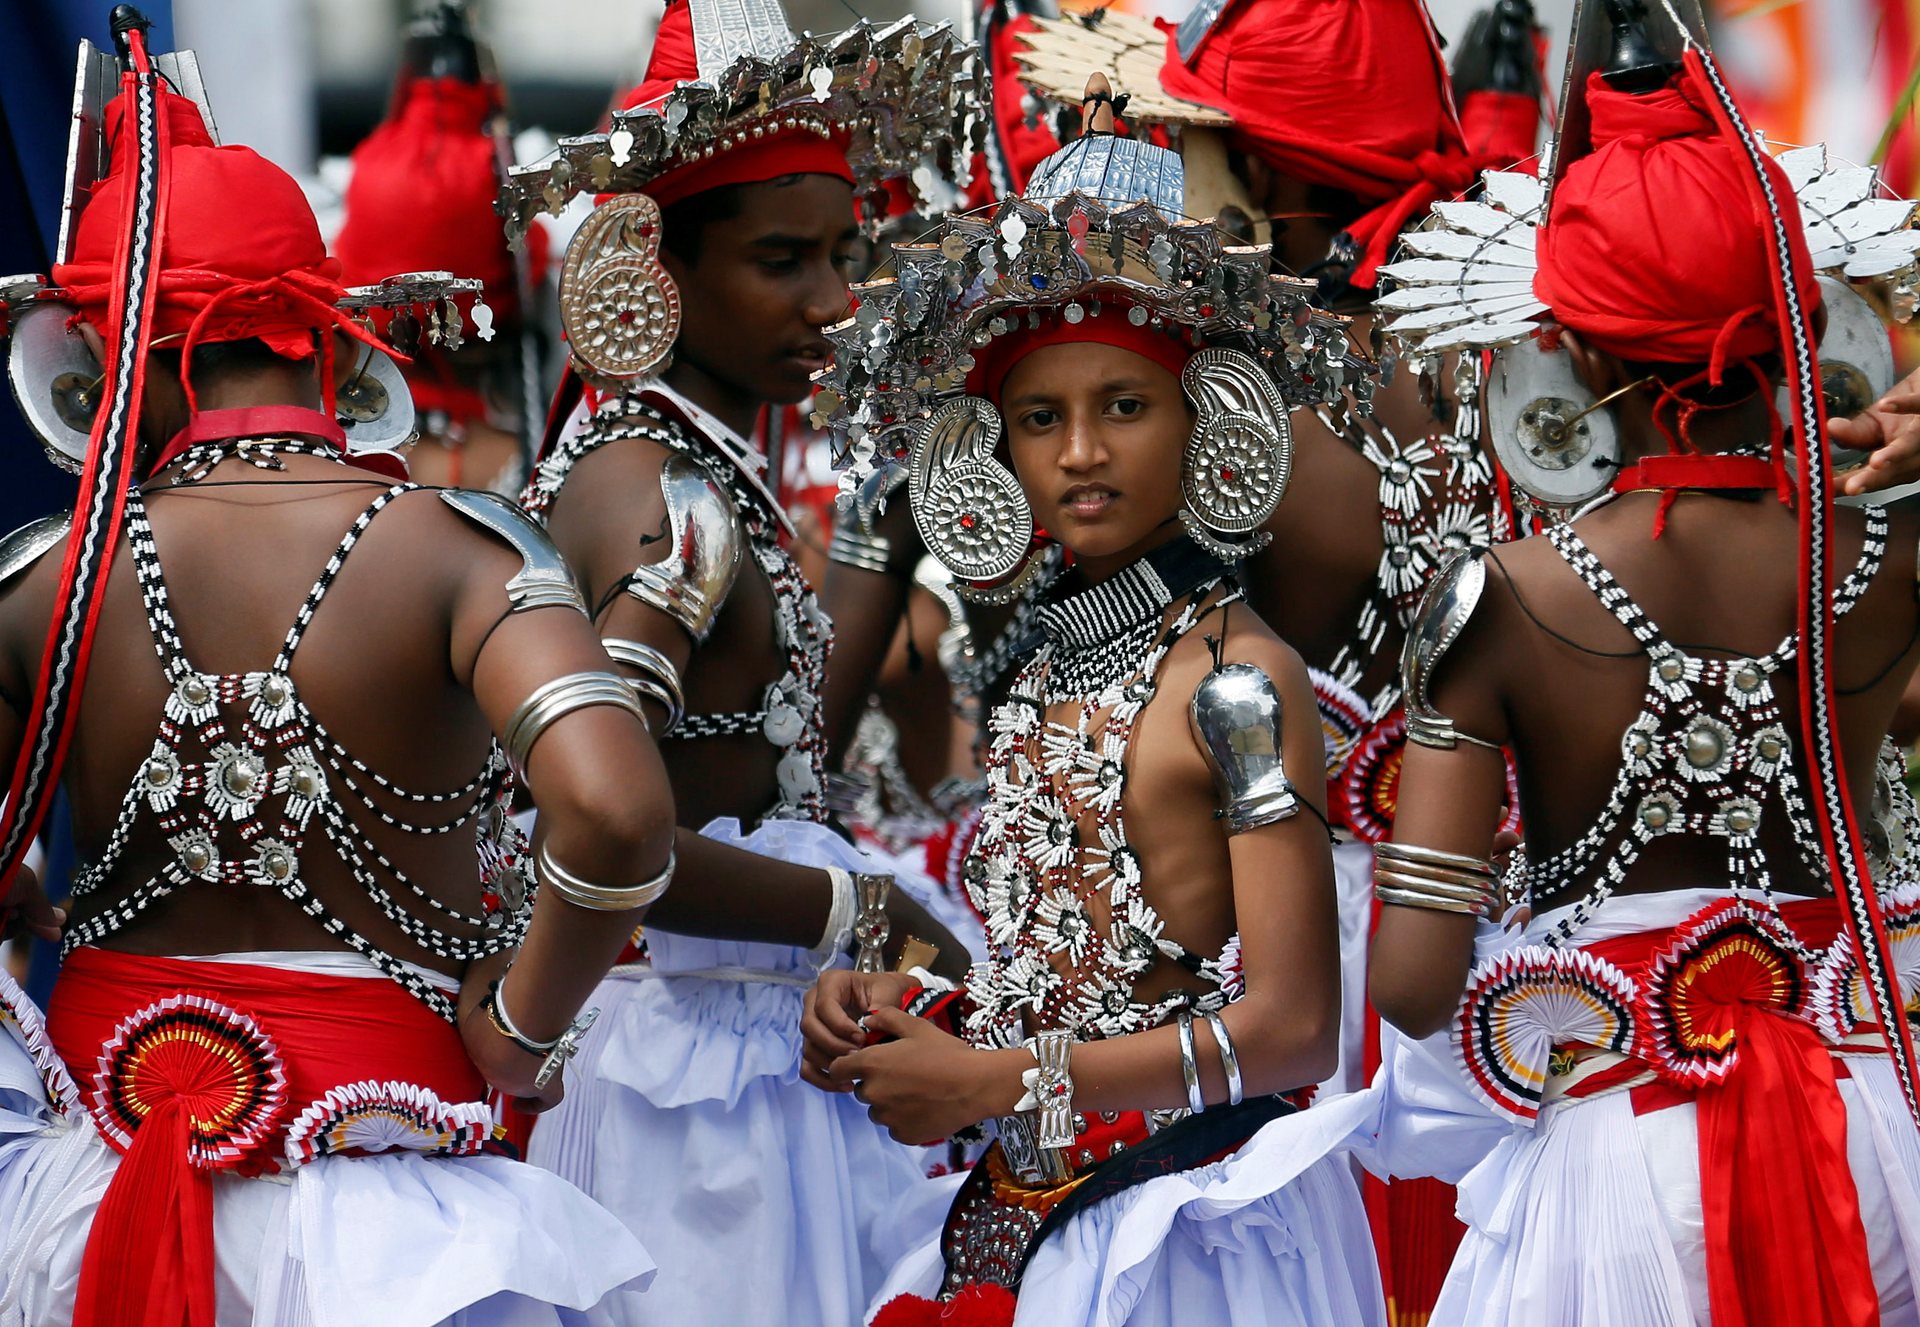 Schoolboys who attend traditional dance classes prepare for their graduation ceremony at a Buddhist temple in the capital city, Colombo, Sri Lanka. PHOTO: REUTERS